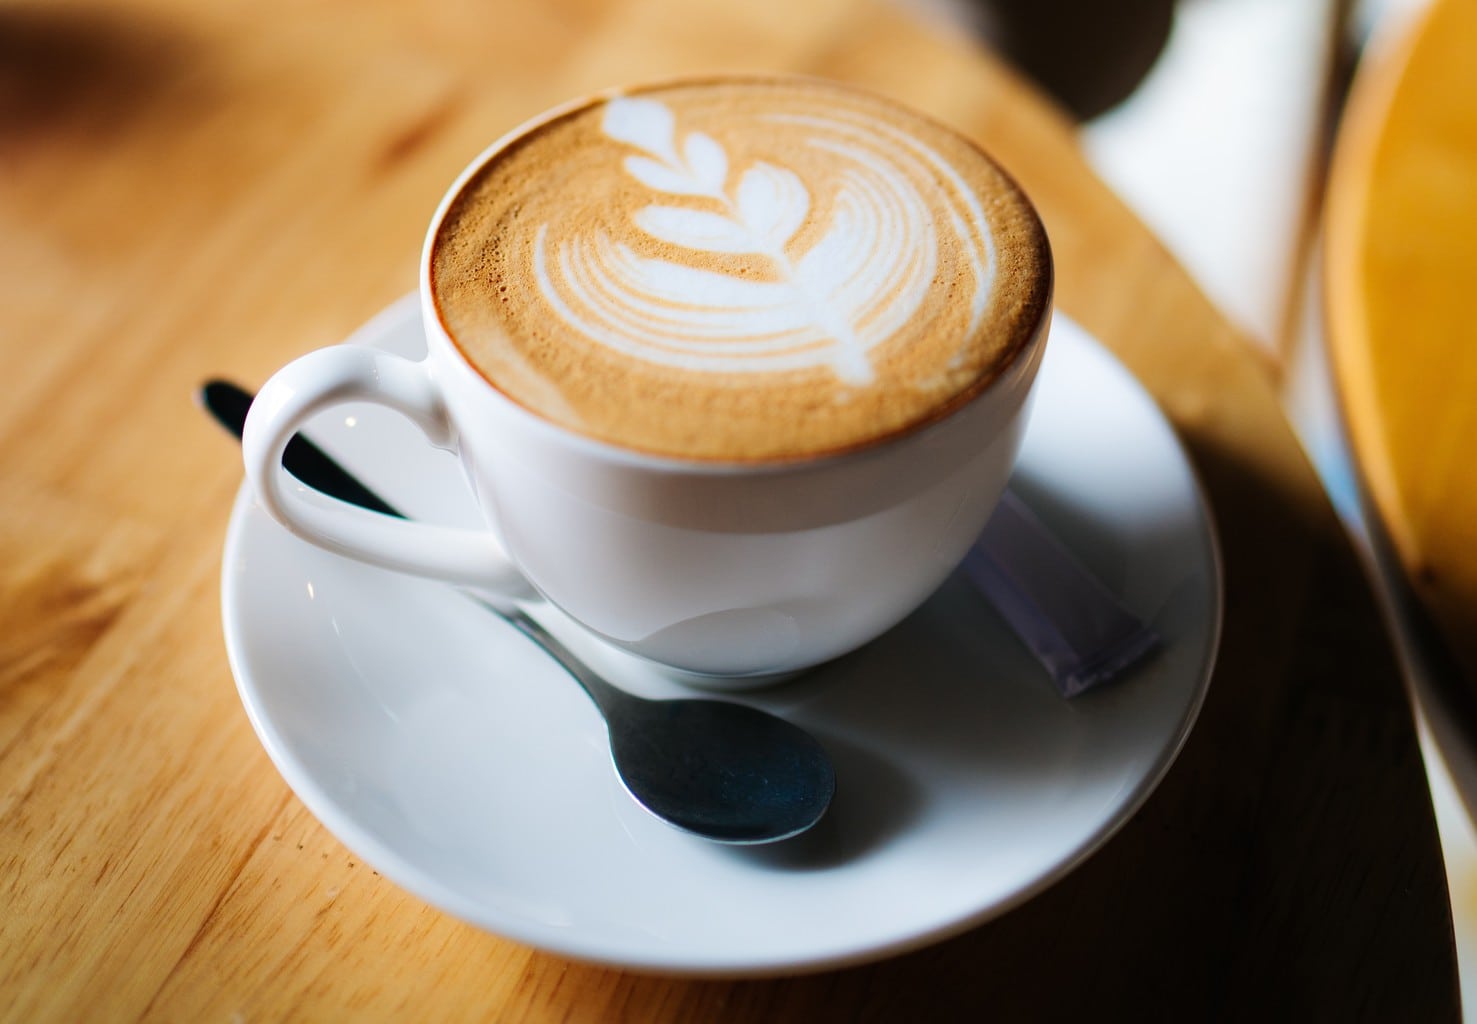 Get confused by the menu at your local coffee shop? You're not the only one! Read all about what a café latte is so you can decide if it's your next coffee order.